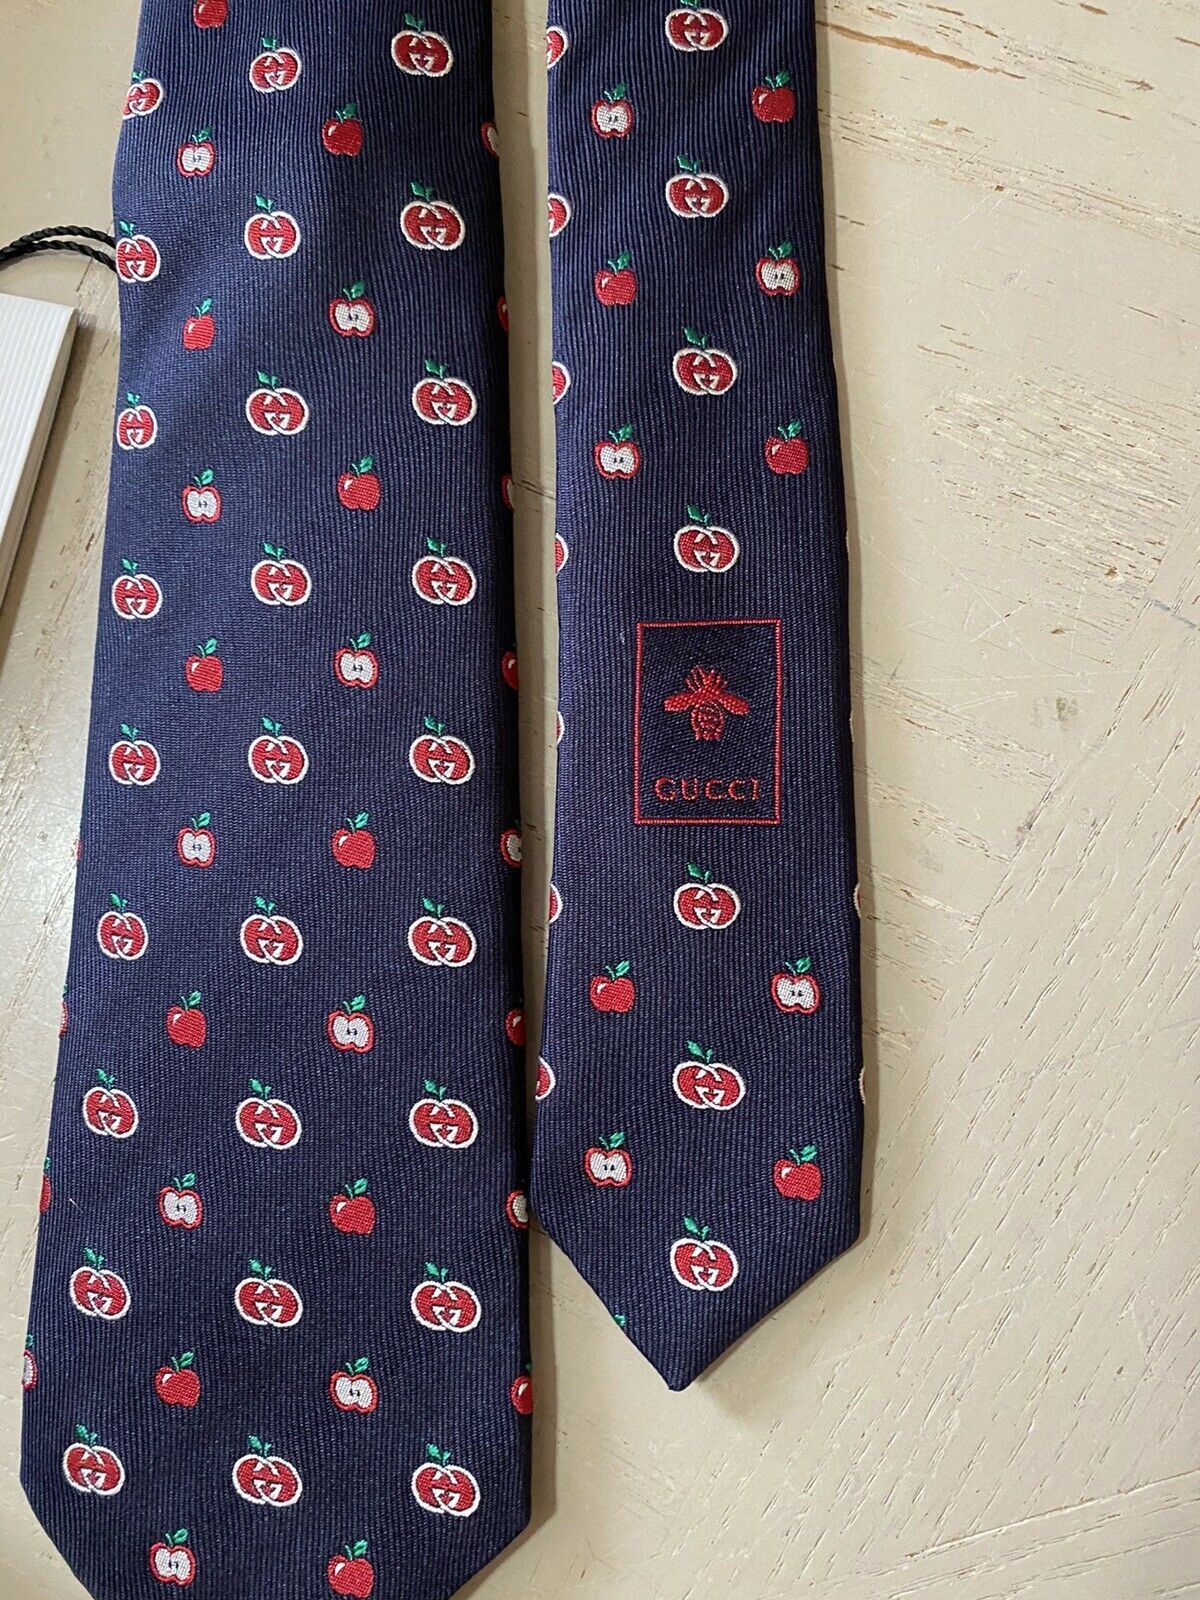 New  Gucci Mens GG Monogram Neck Tie Dark Blue/Red made in Italy